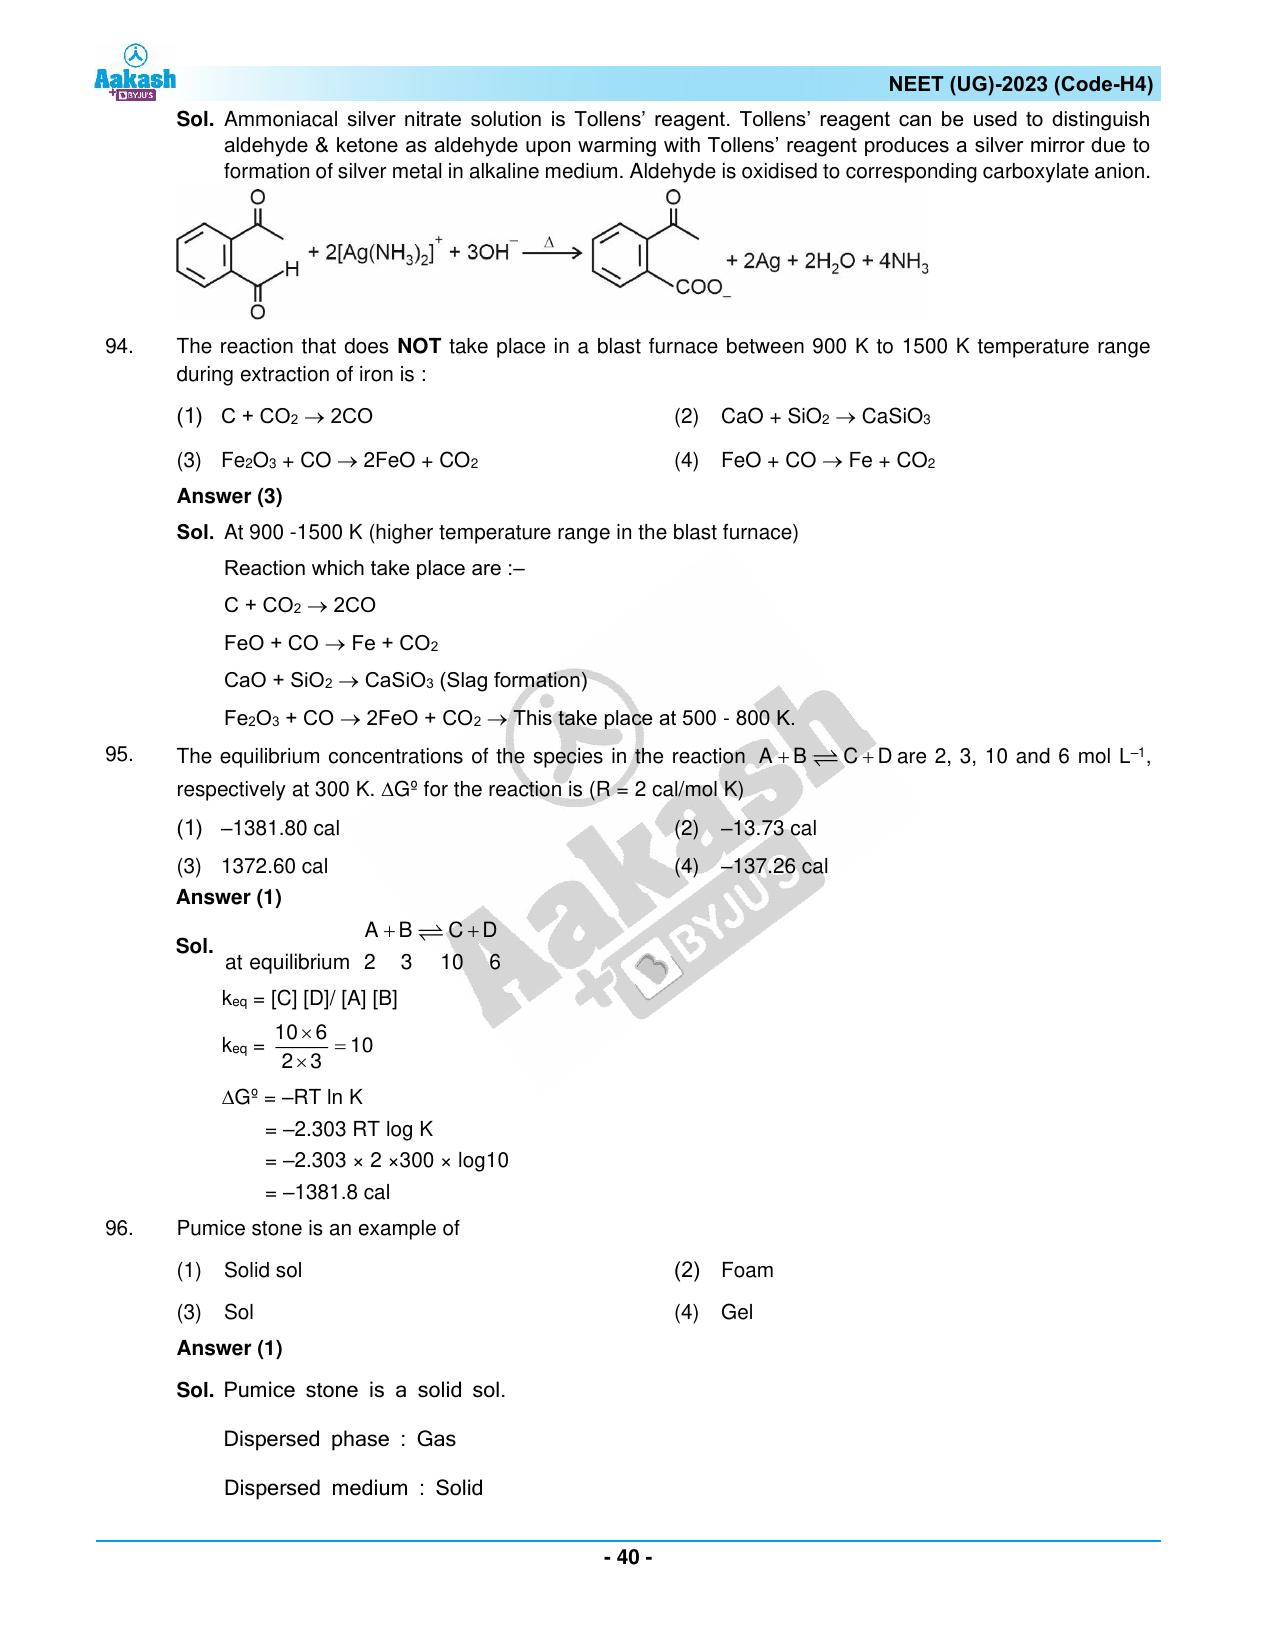 NEET 2023 Question Paper H4 - Page 40